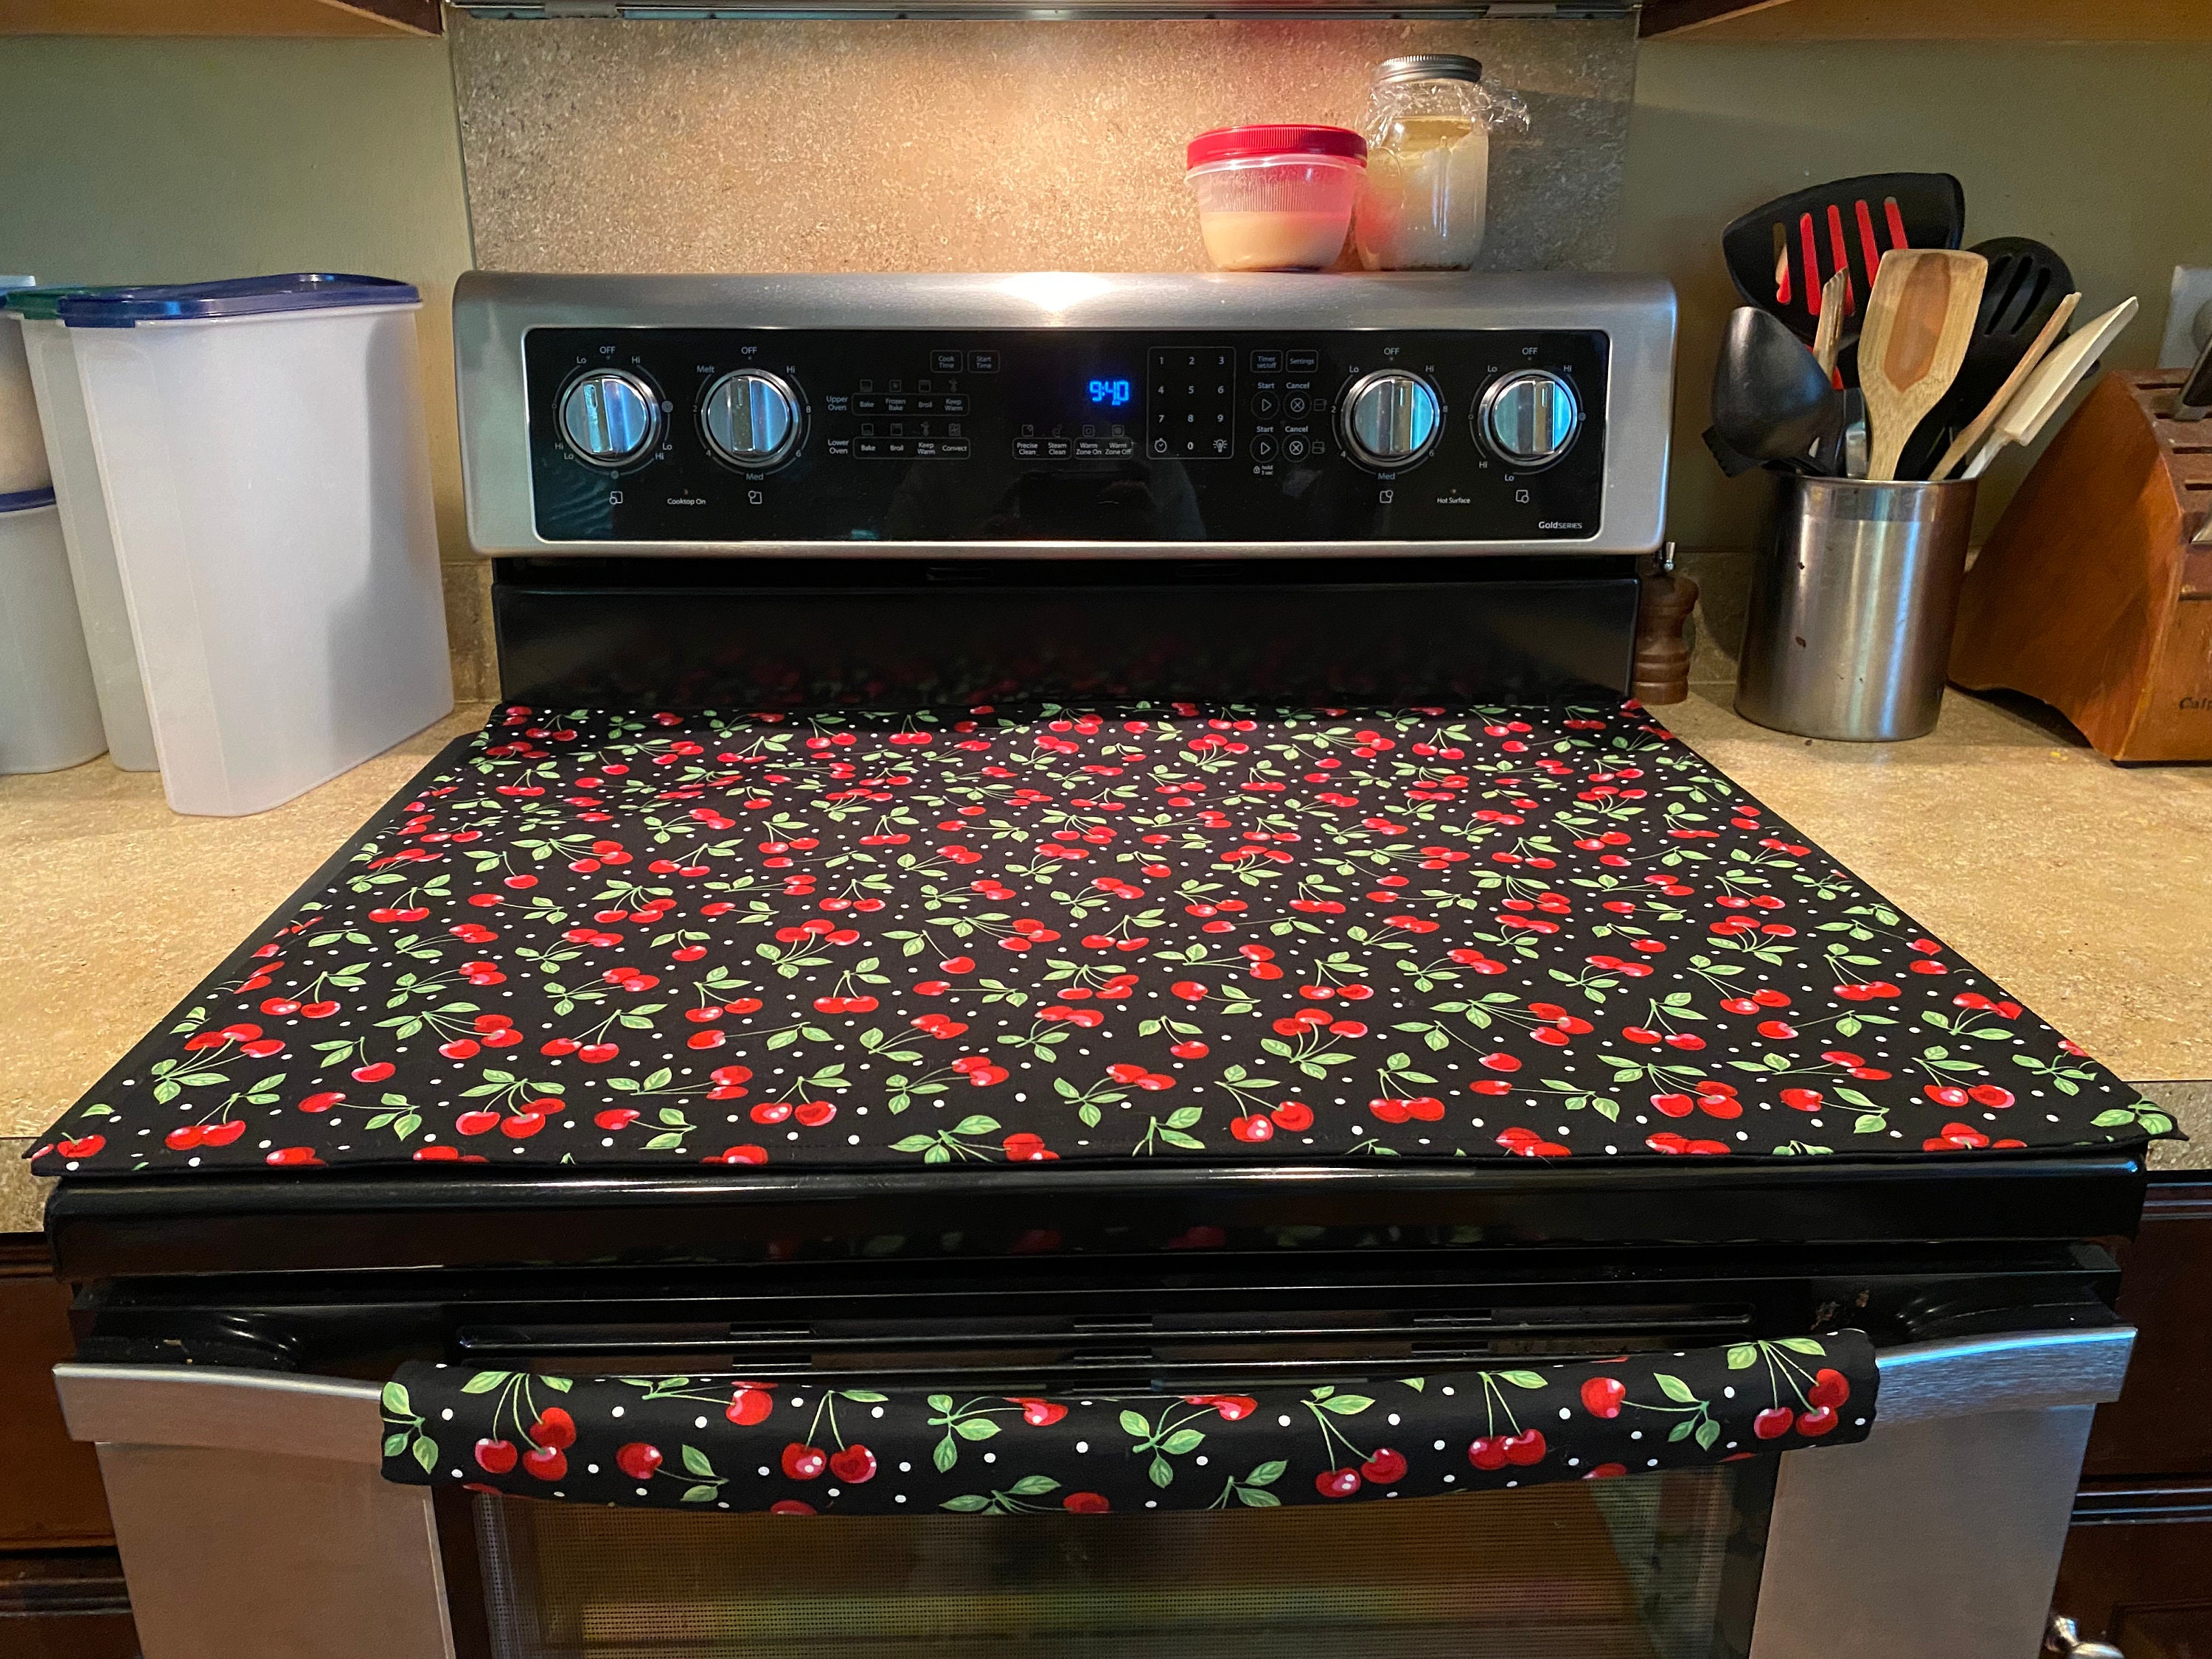 Glass Top Stove Covers